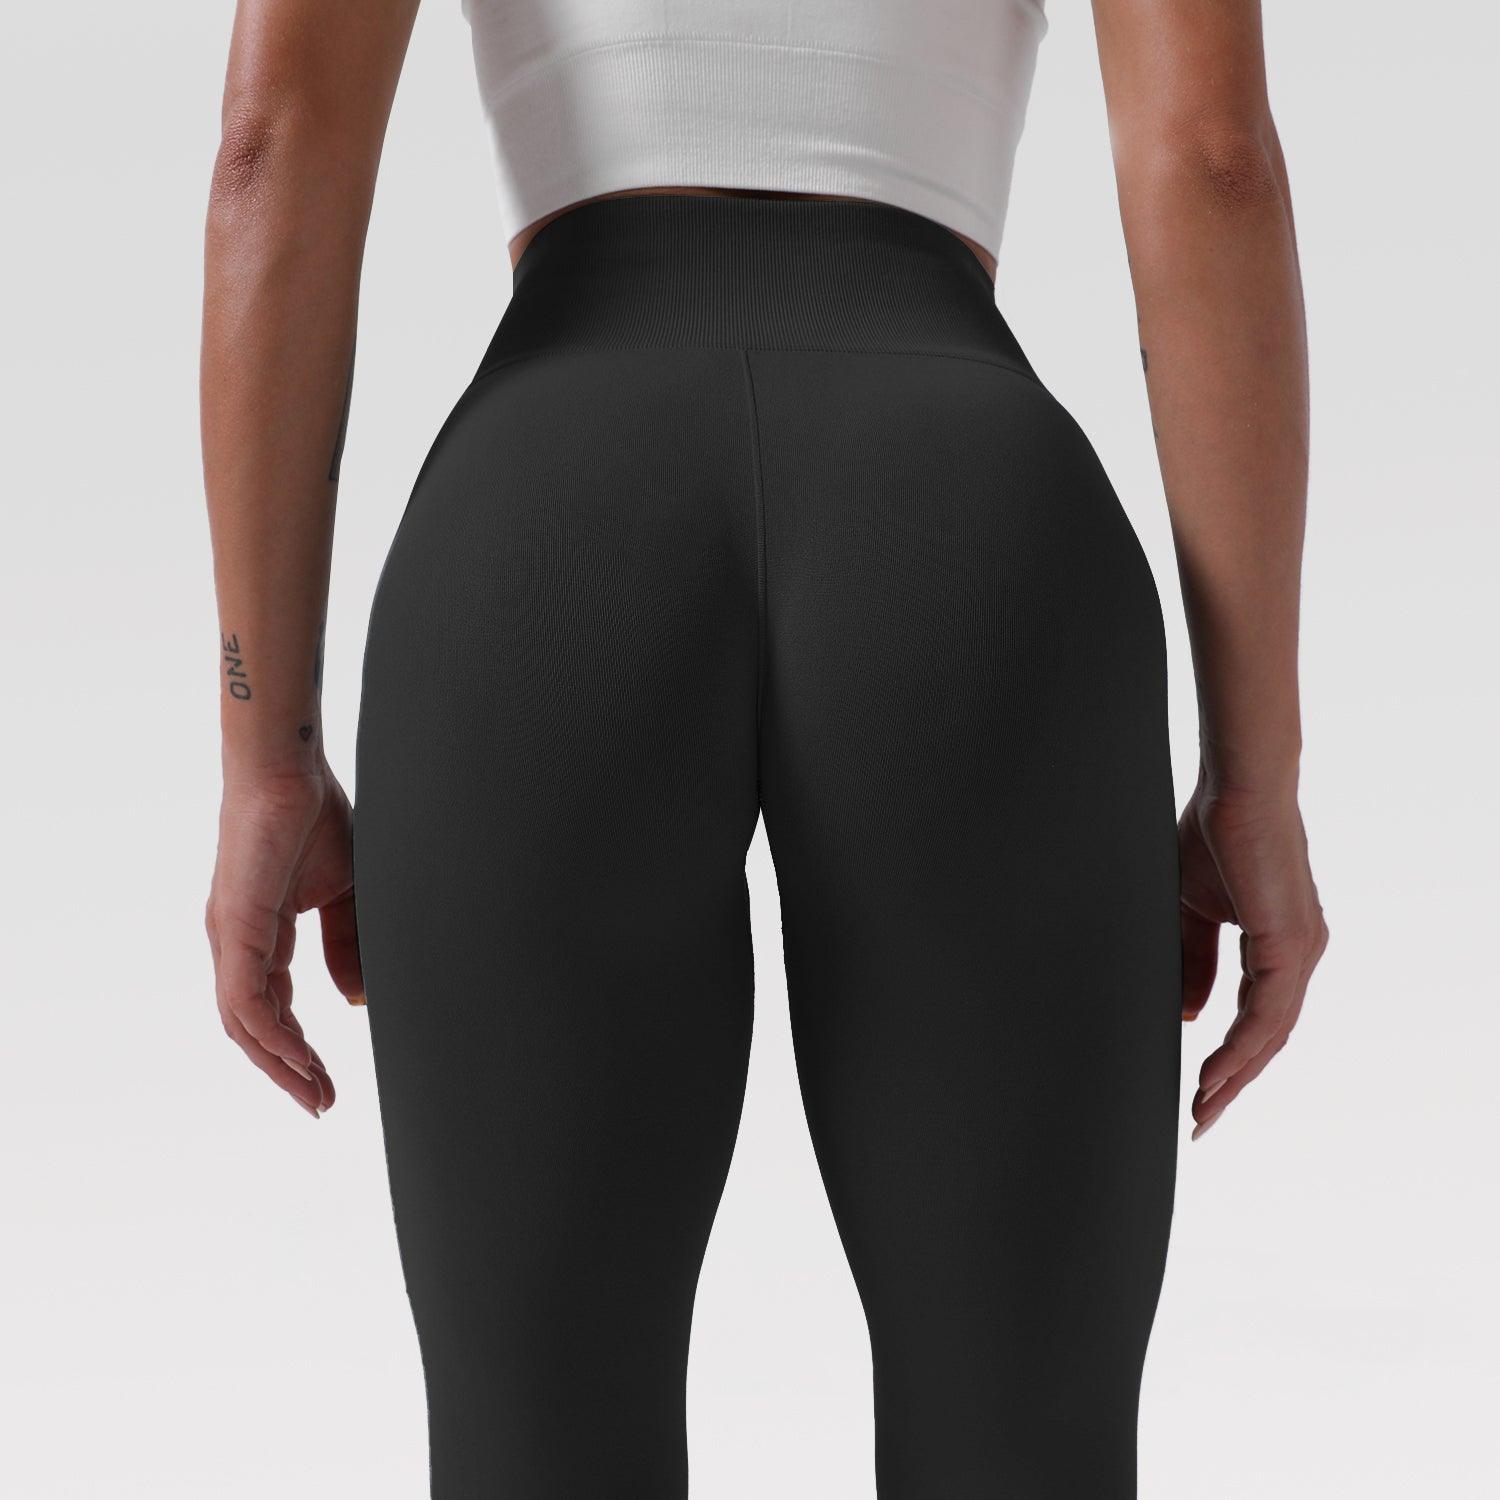 Legging Essentials Seamless - FITFRENCHIES